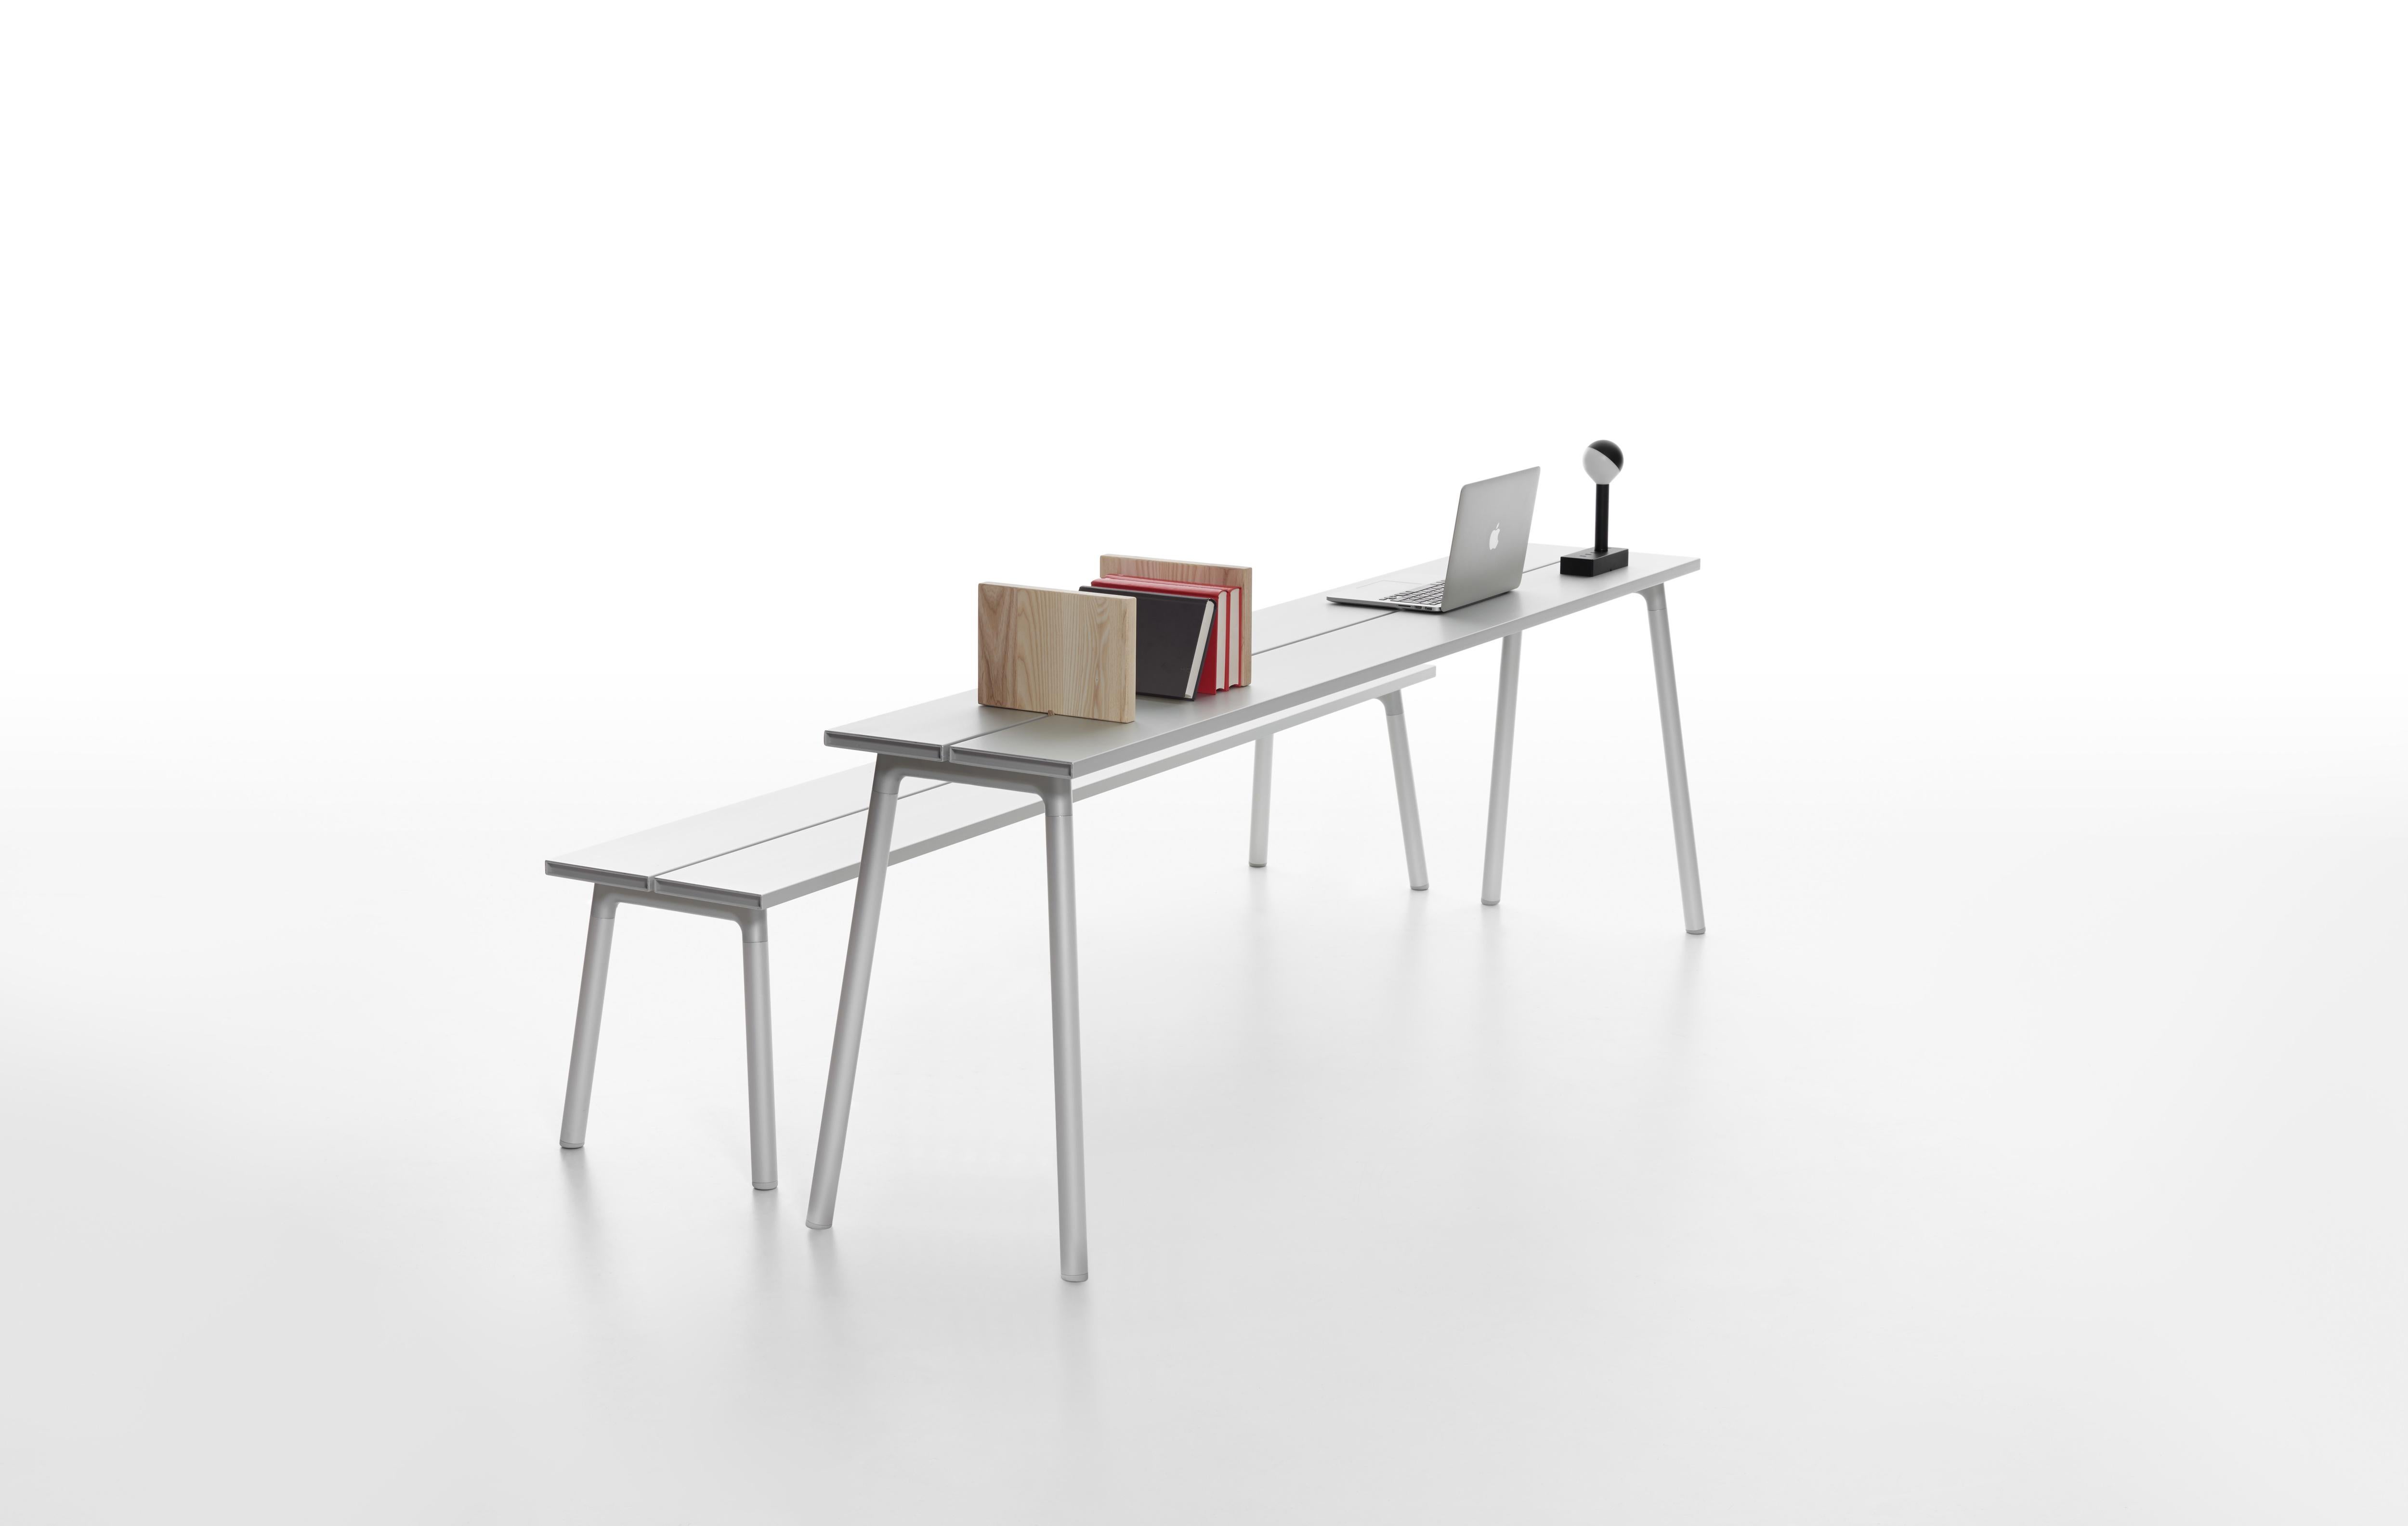 Emeco Run 3-Seat Bench in Aluminum and Cedar by Sam Hecht and Kim Colin 1